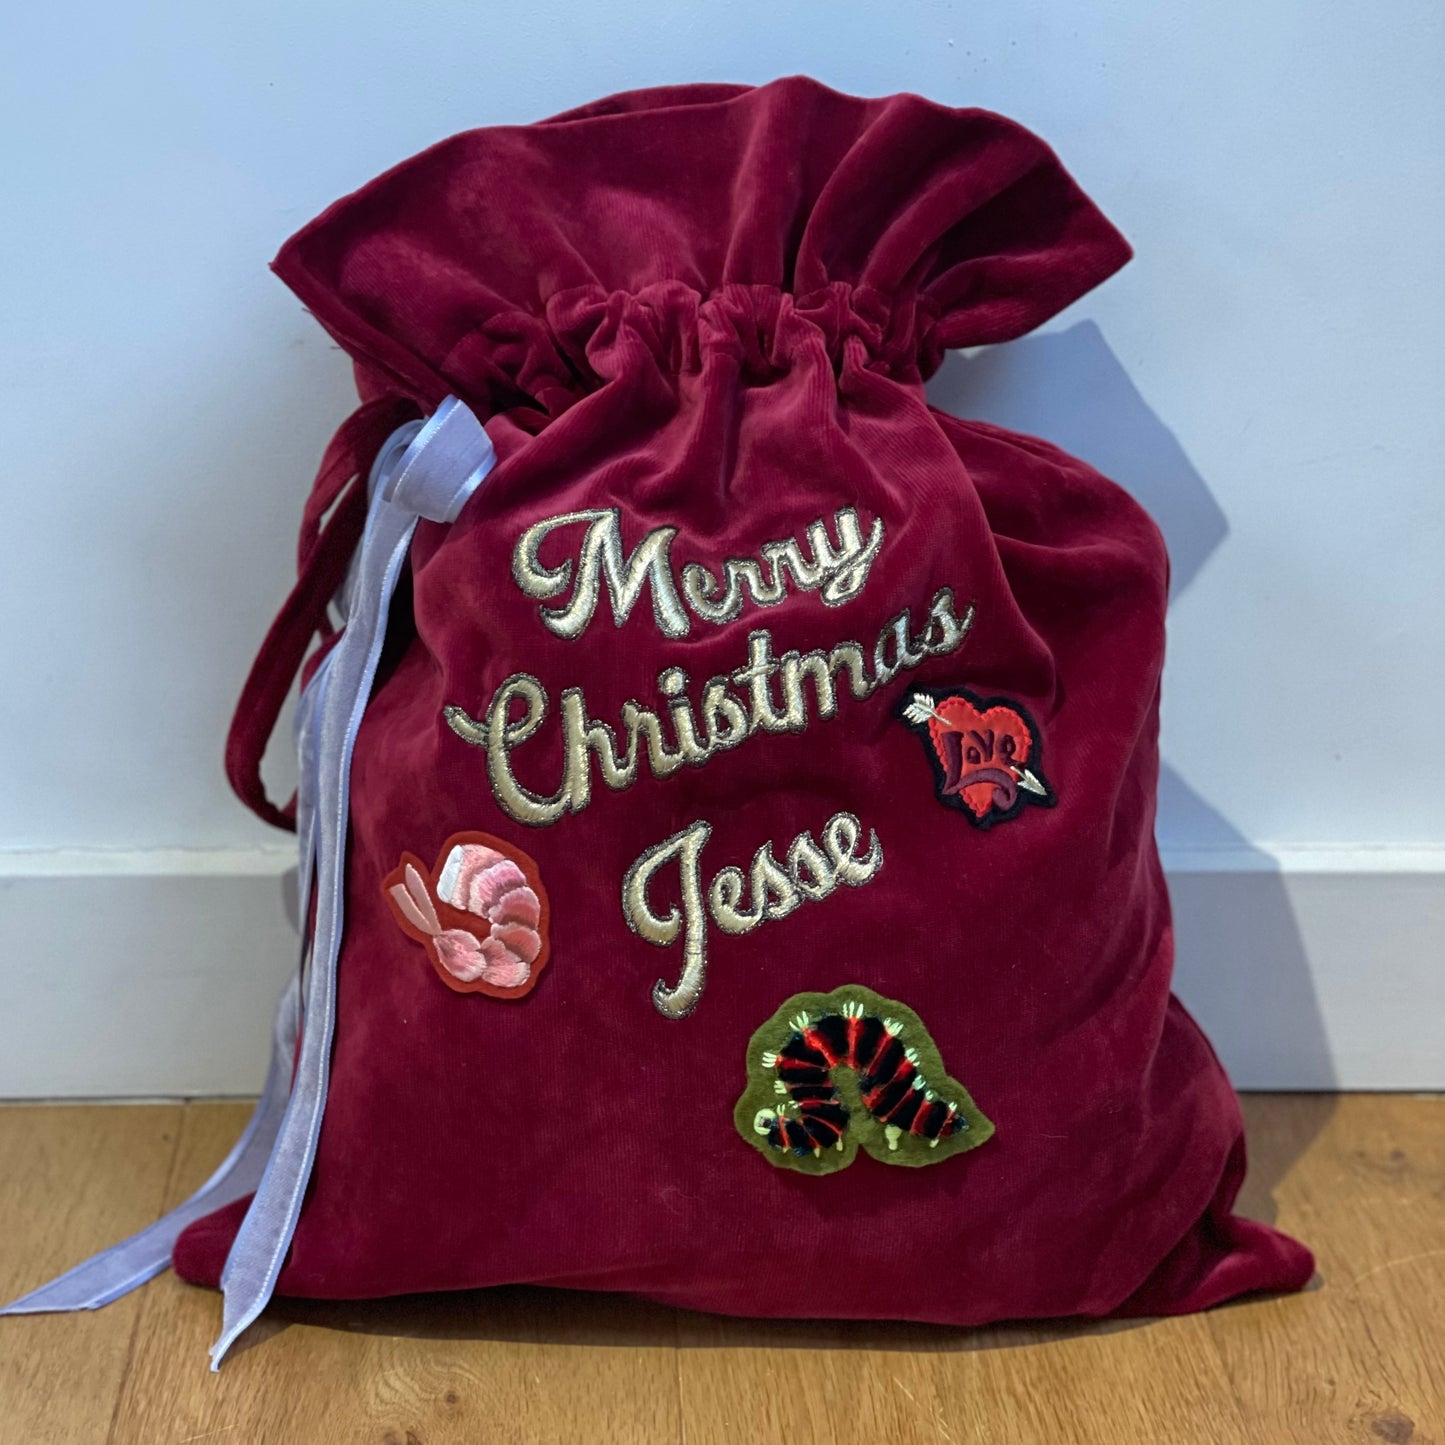 Maroon velvet large drawstring sack against pale blue painted wall. The sack has Merry Christmas Jesse embroidered in gold thread and three patches, a caterpilla, love heart and the prawn tail